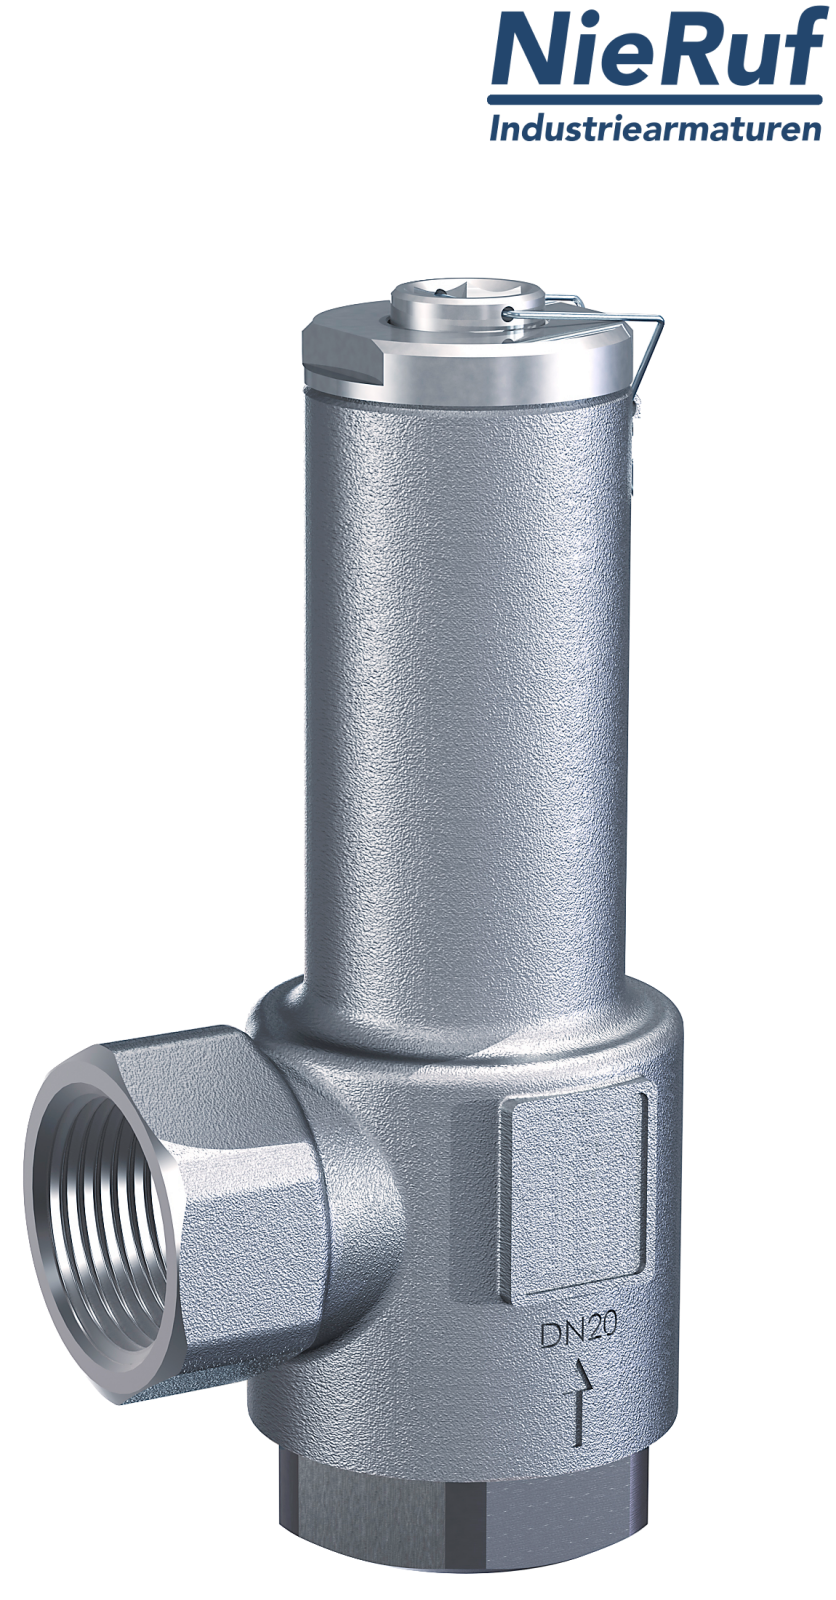 angle-type overflow valve 1" inch fm UV04 stainless steel AISI 316L 2 - 12 bar